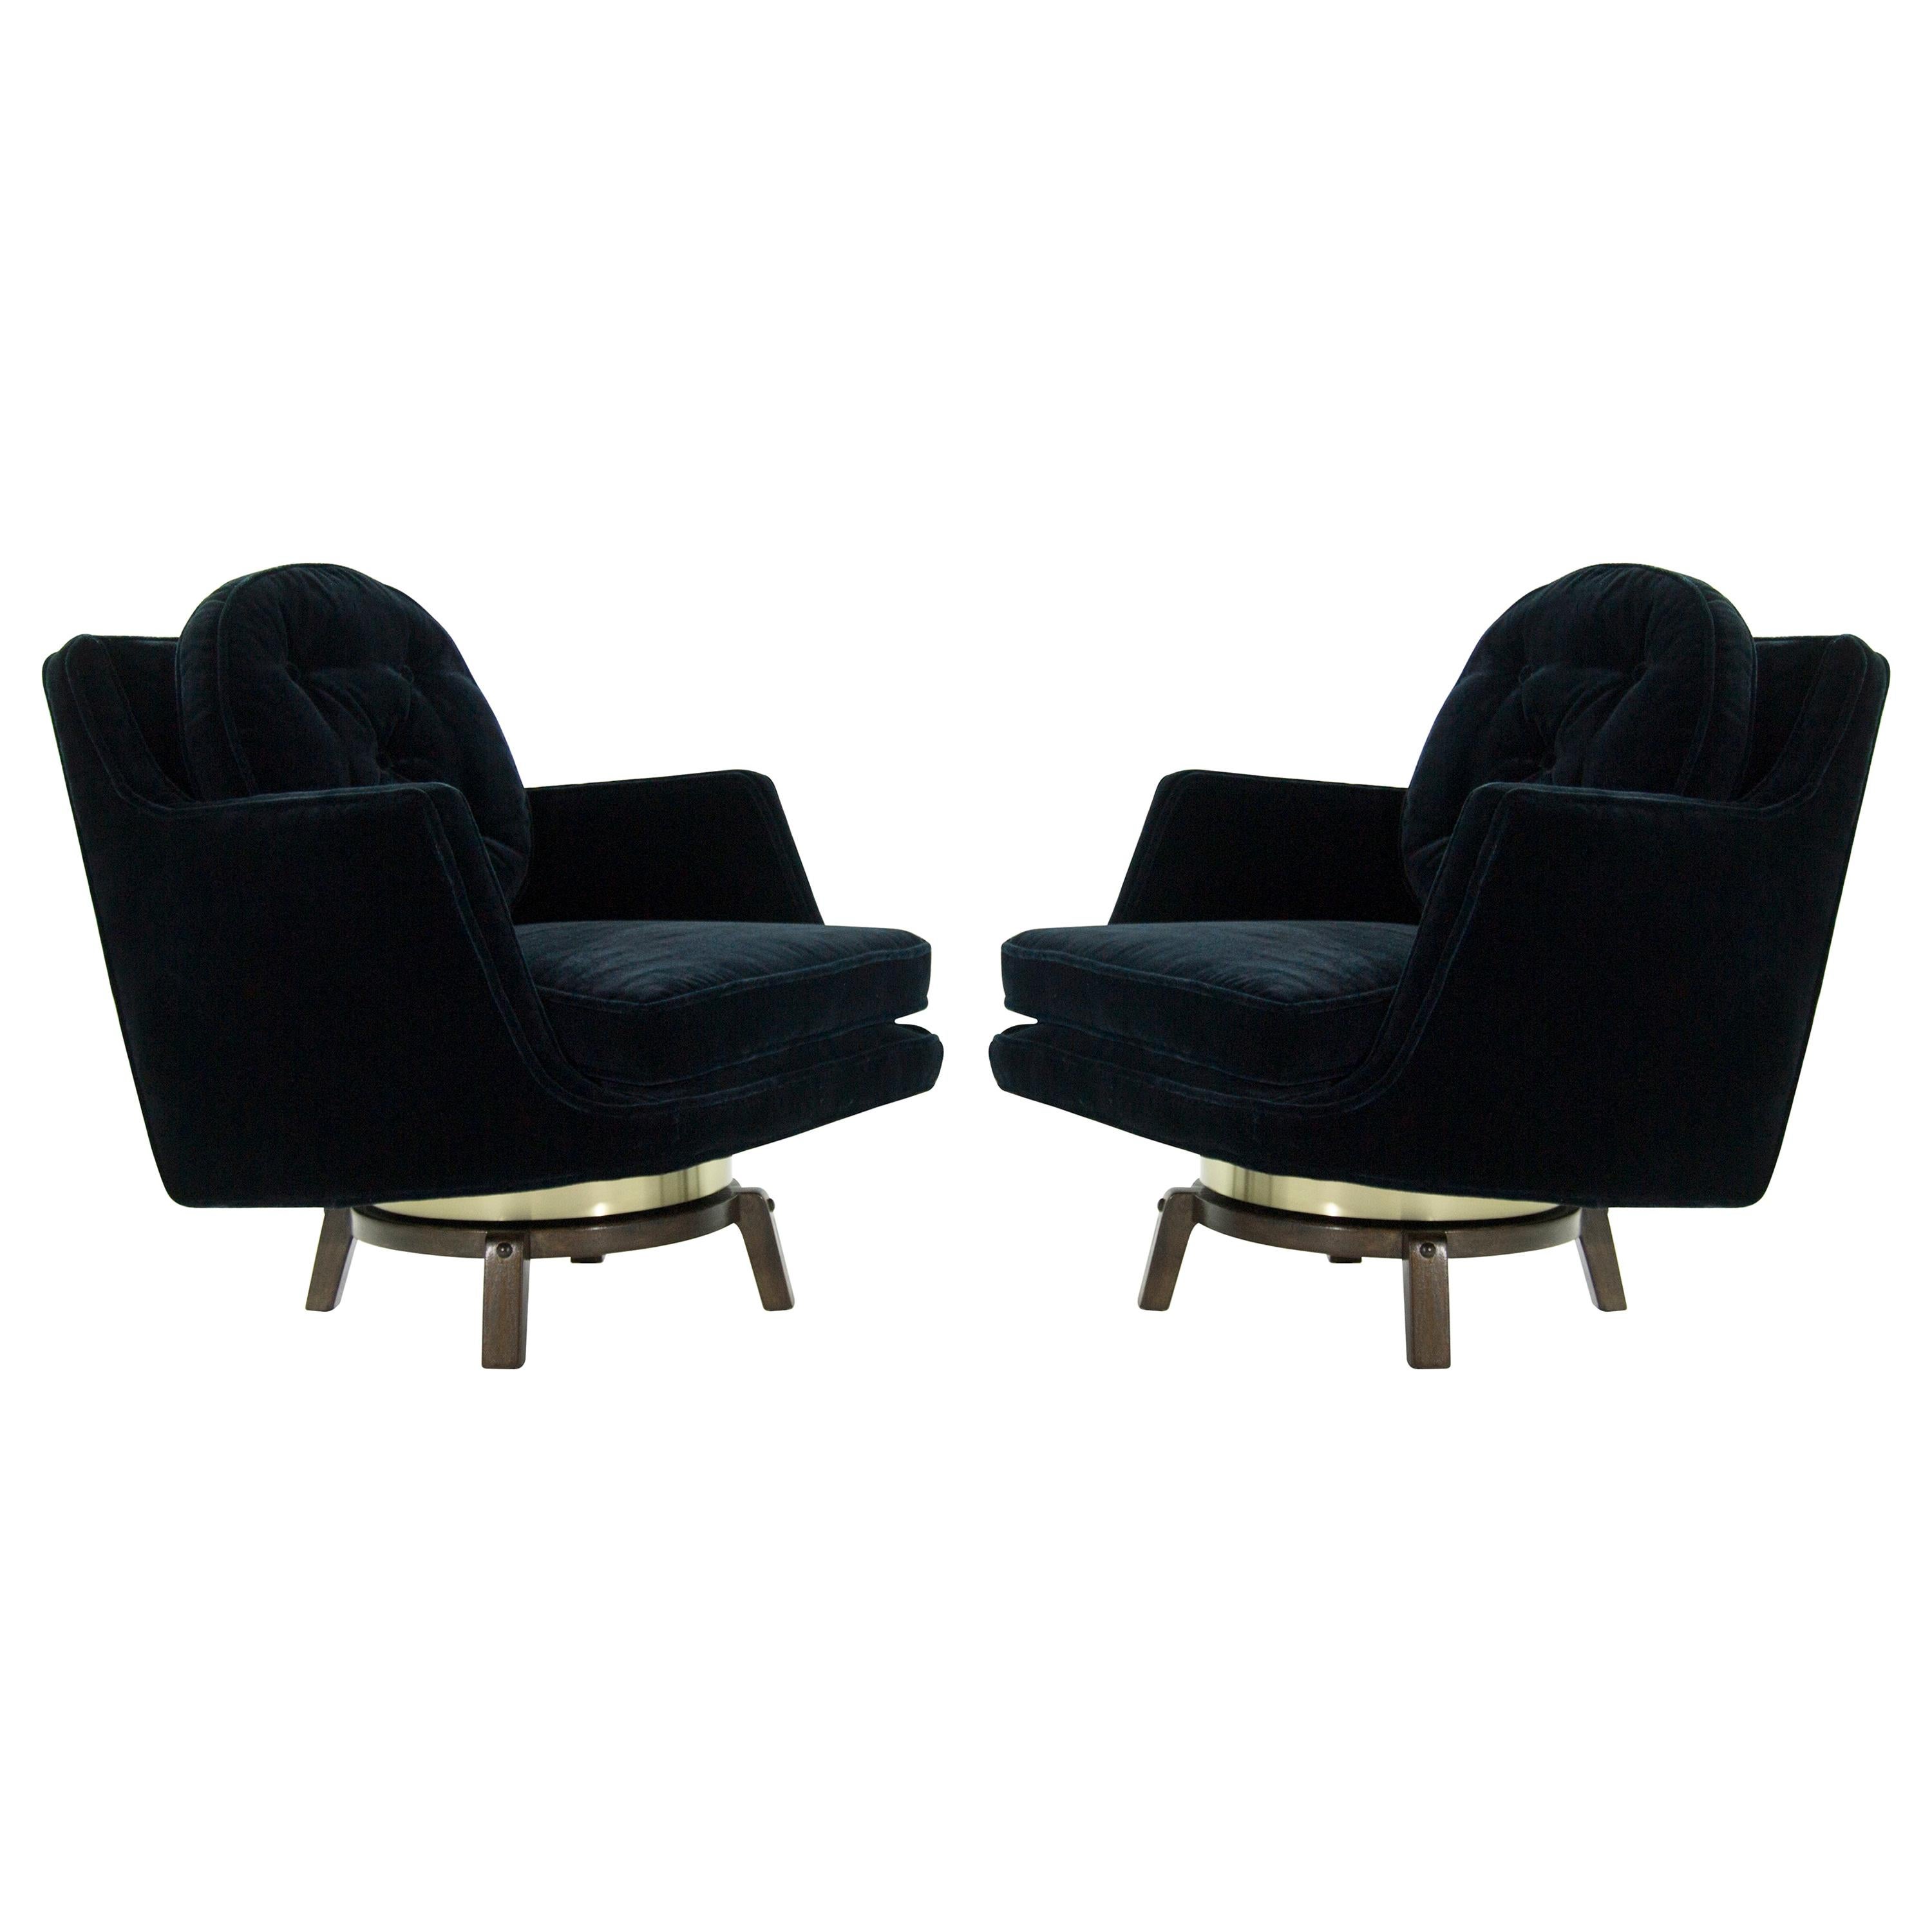 Brass Accented Swivel Chairs by Edward Wormley for Dunbar, 1950s